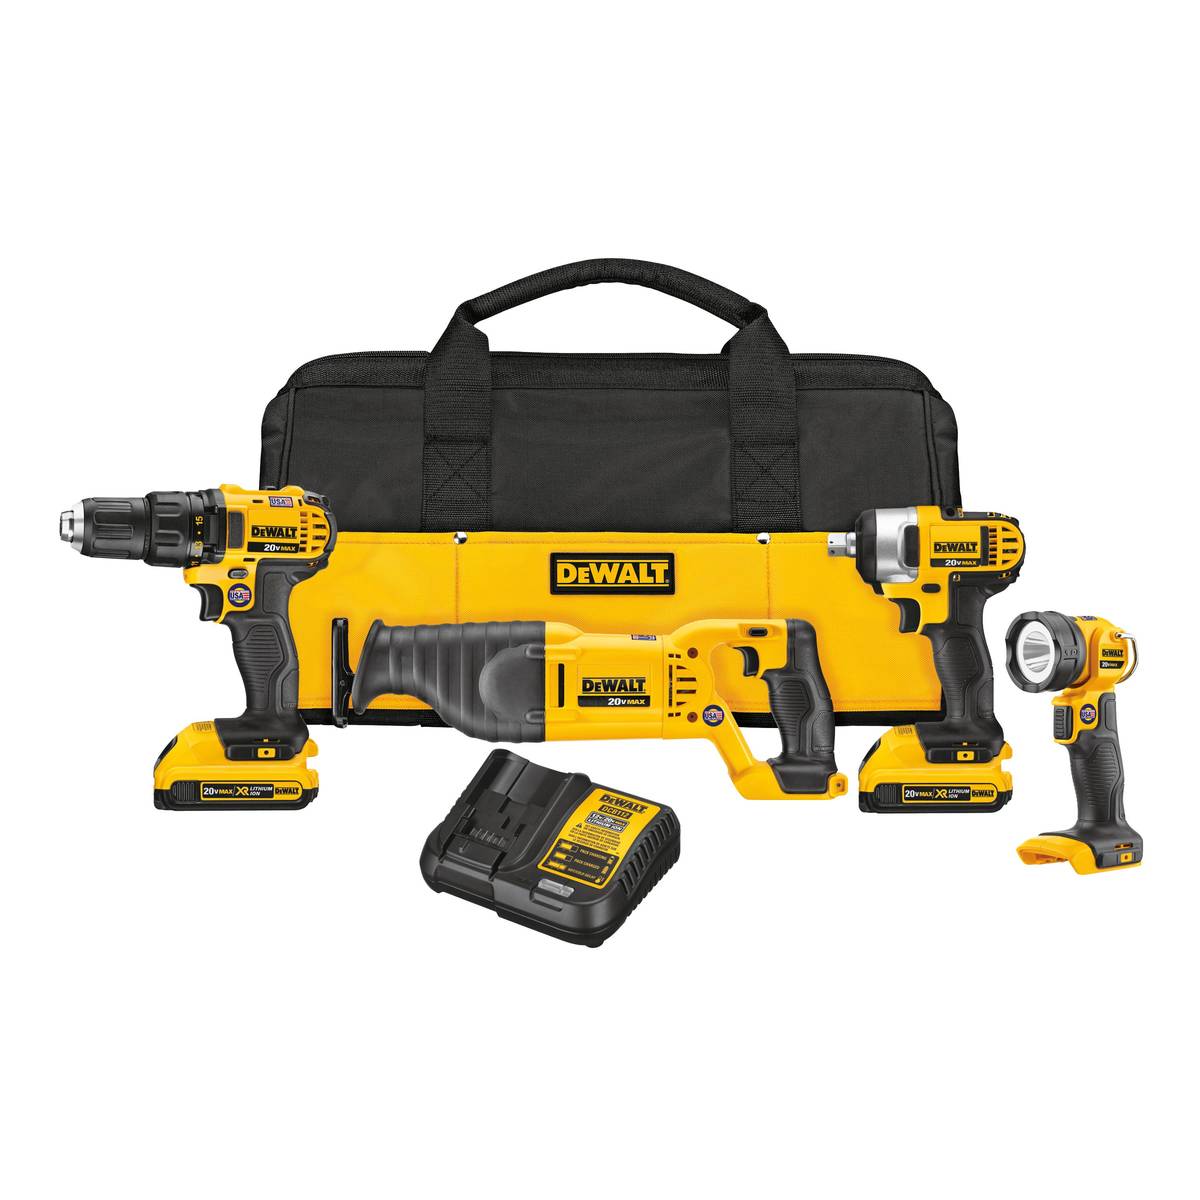 The DeWalt four-tool combo kit includes drill/driver, impact wrench, reciprocating saw, LED wor ...